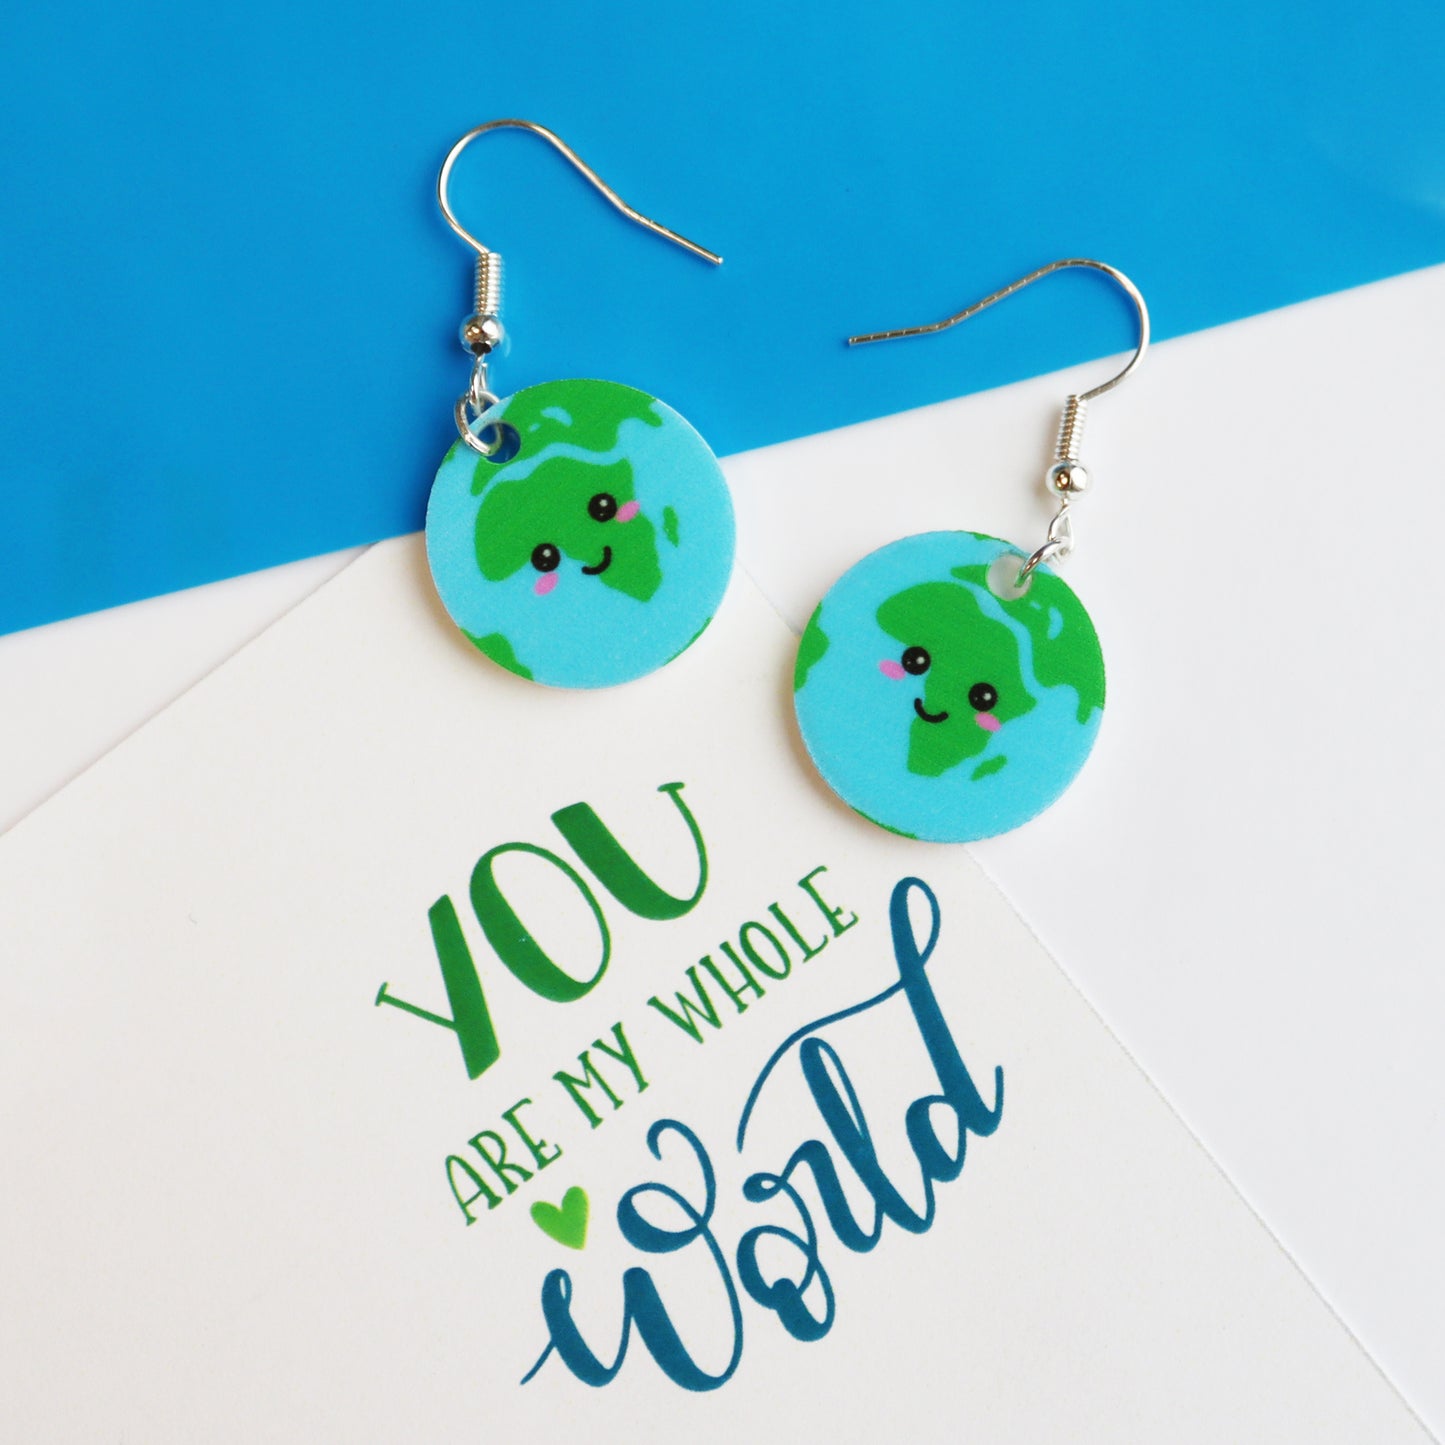 You are my whole world fun kawaii based earth earrings shown in a pair on a mixed media background